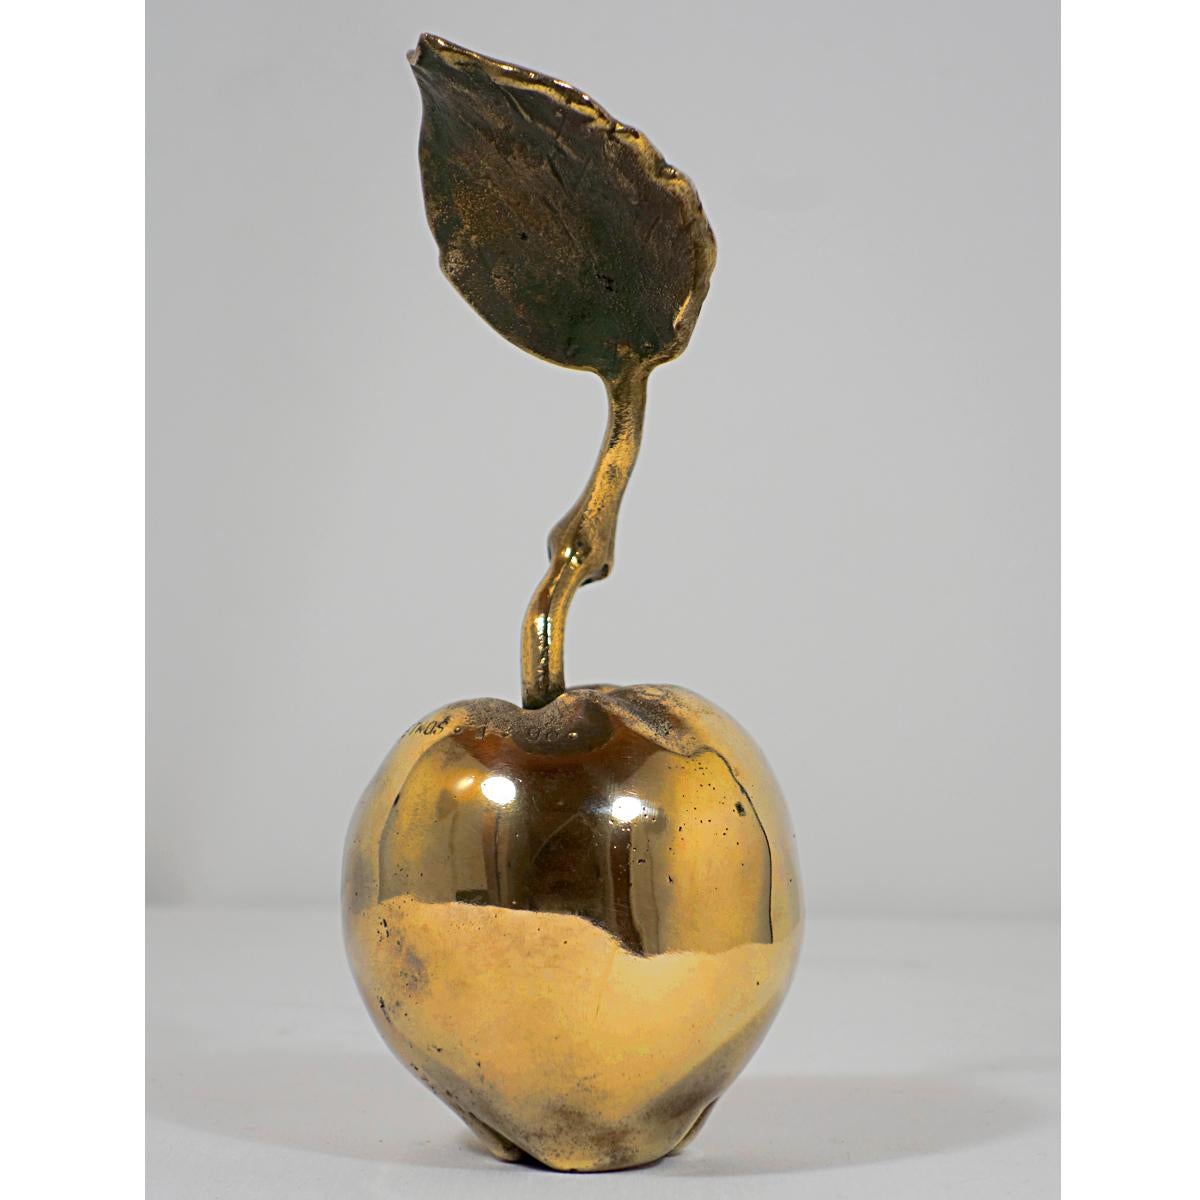 Aleksander Detkos, born in 1939 in Gorlice, is a Polish sculptor.

Fascinating piece made by Detkos in 1990. It depicts the quince fruit which itself is about as hard as this bronze. The high up leave gives it a somewhat burlesque appearance.